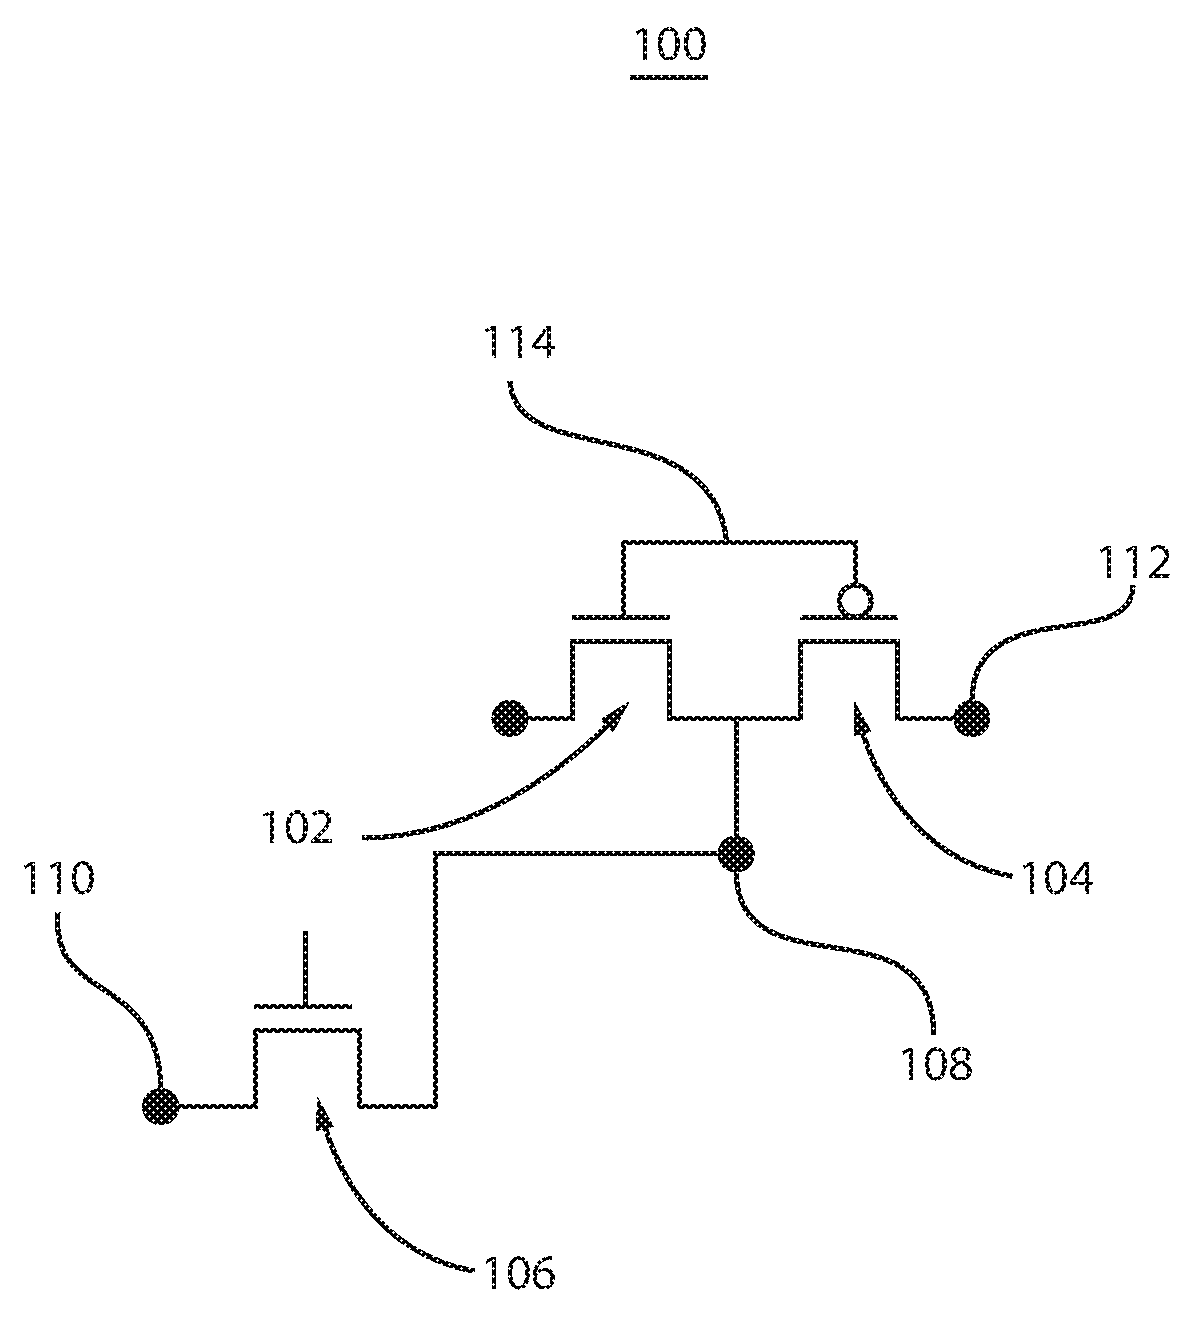 High-density EEPROM arrays having parallel-connected common-floating-gate NFET and PFET as memory cell